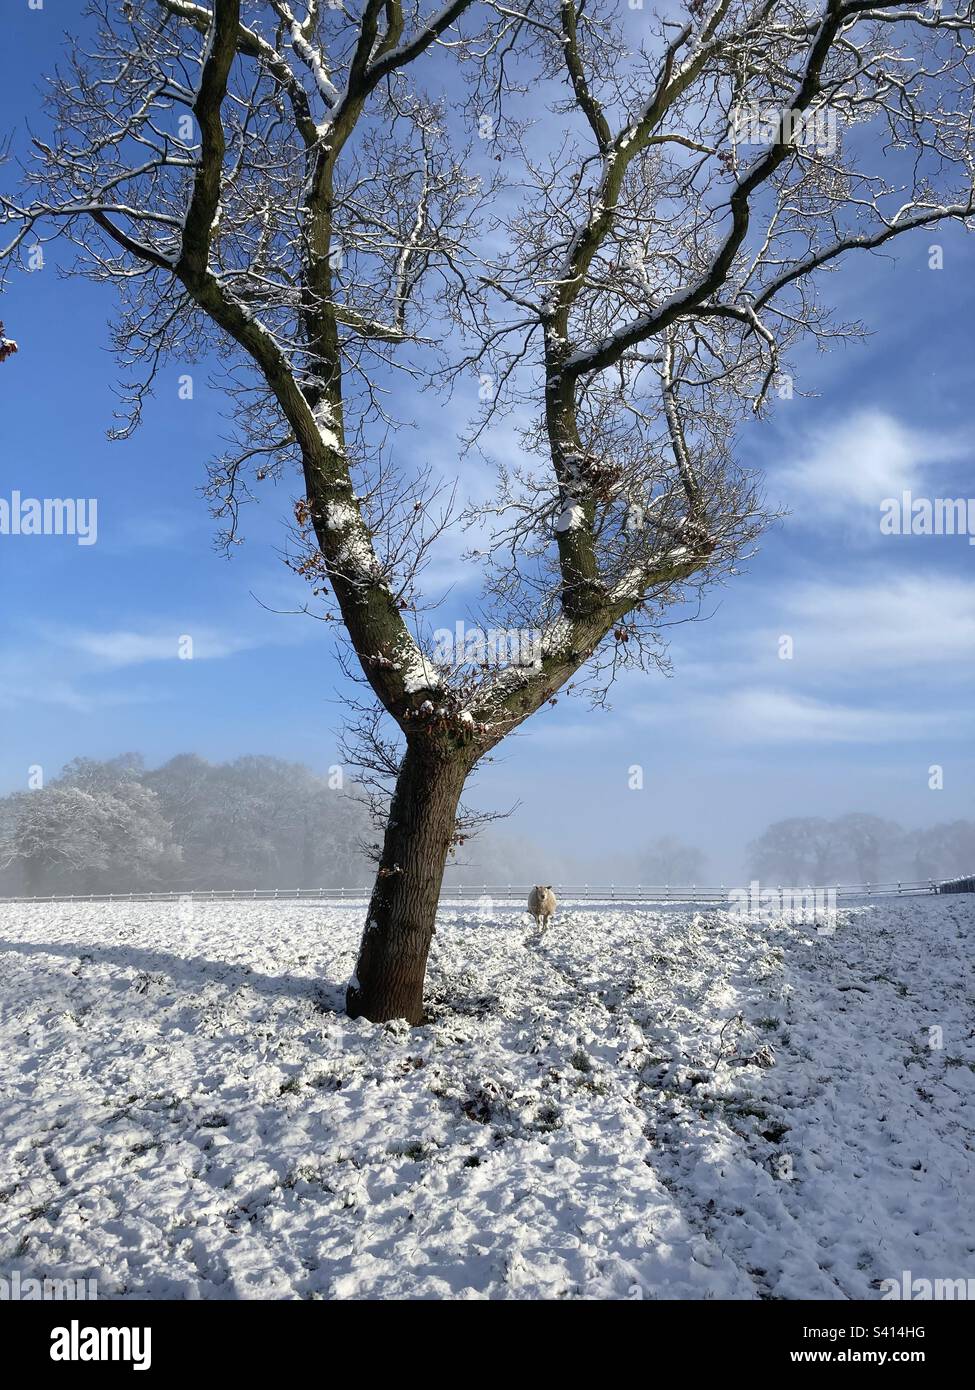 Snow covered field with a tree and a sheep Stock Photo